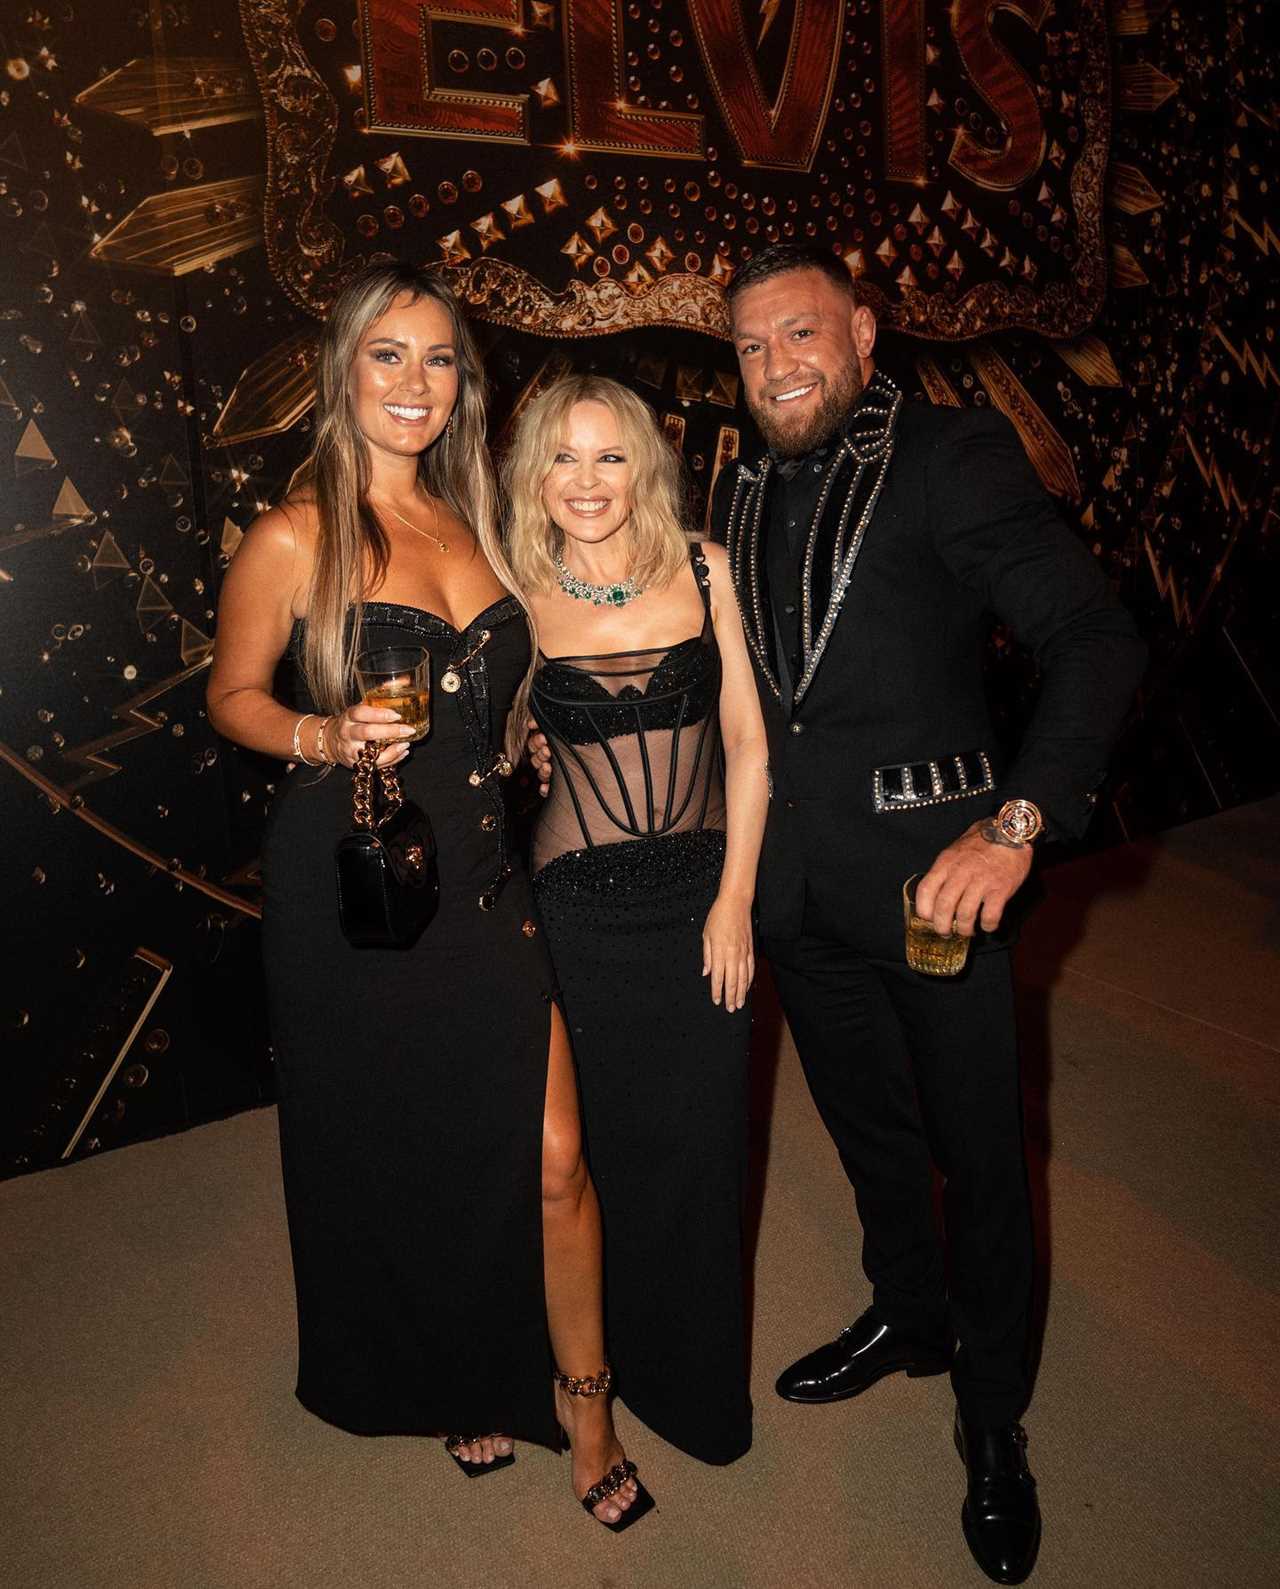 Conor McGregor smiles with Kylie Minogue, the most iconic and beautiful UFC fighter, at the Cannes Film Festival afterparty